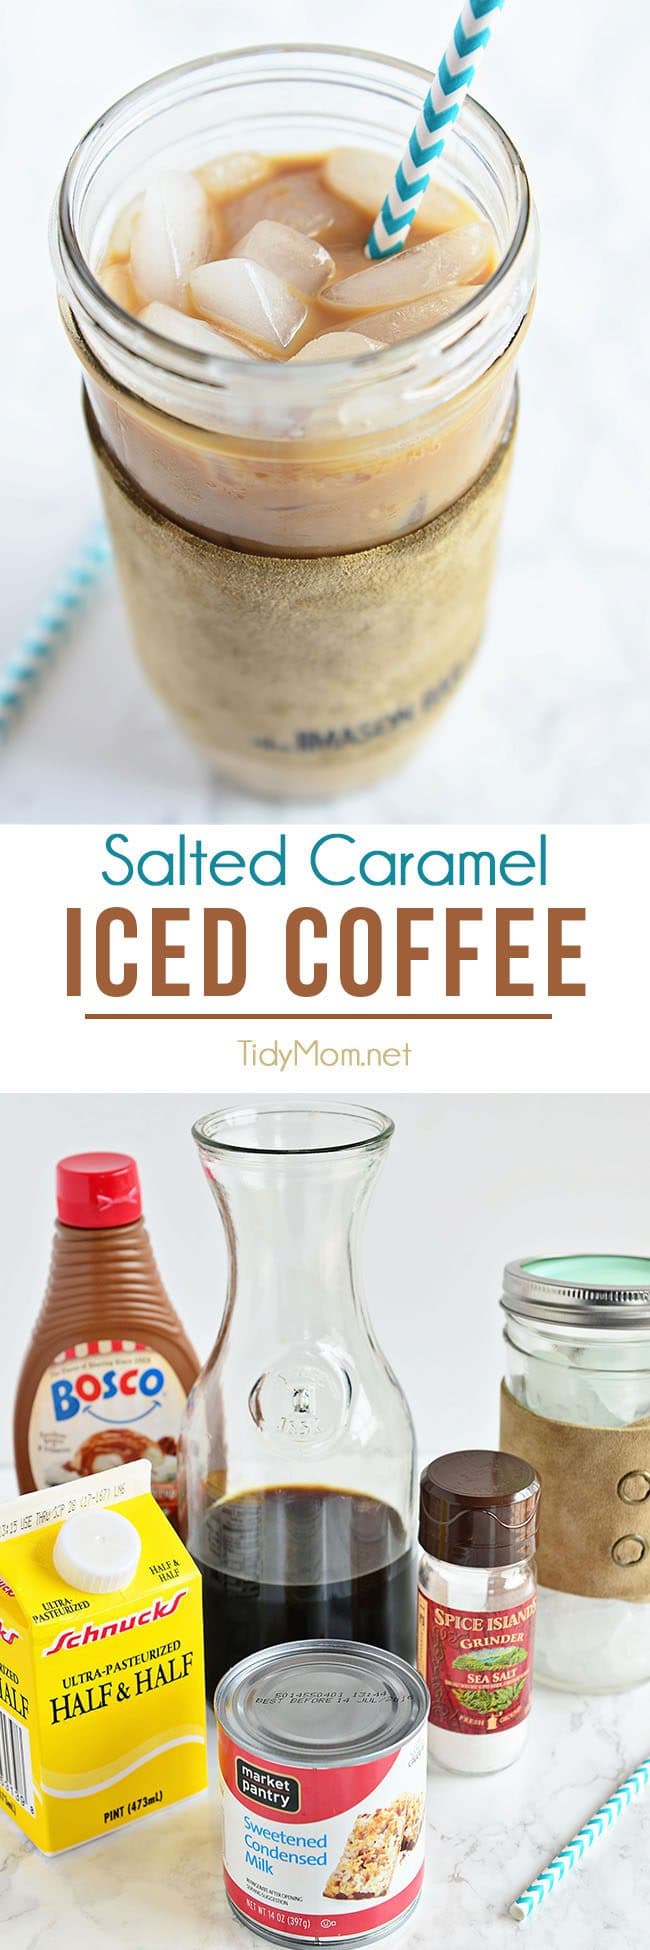 Salted Caramel Iced Coffee at home is so easy! Way cheaper than the coffee shop and every bit as delicious! recipe at TidyMom.net